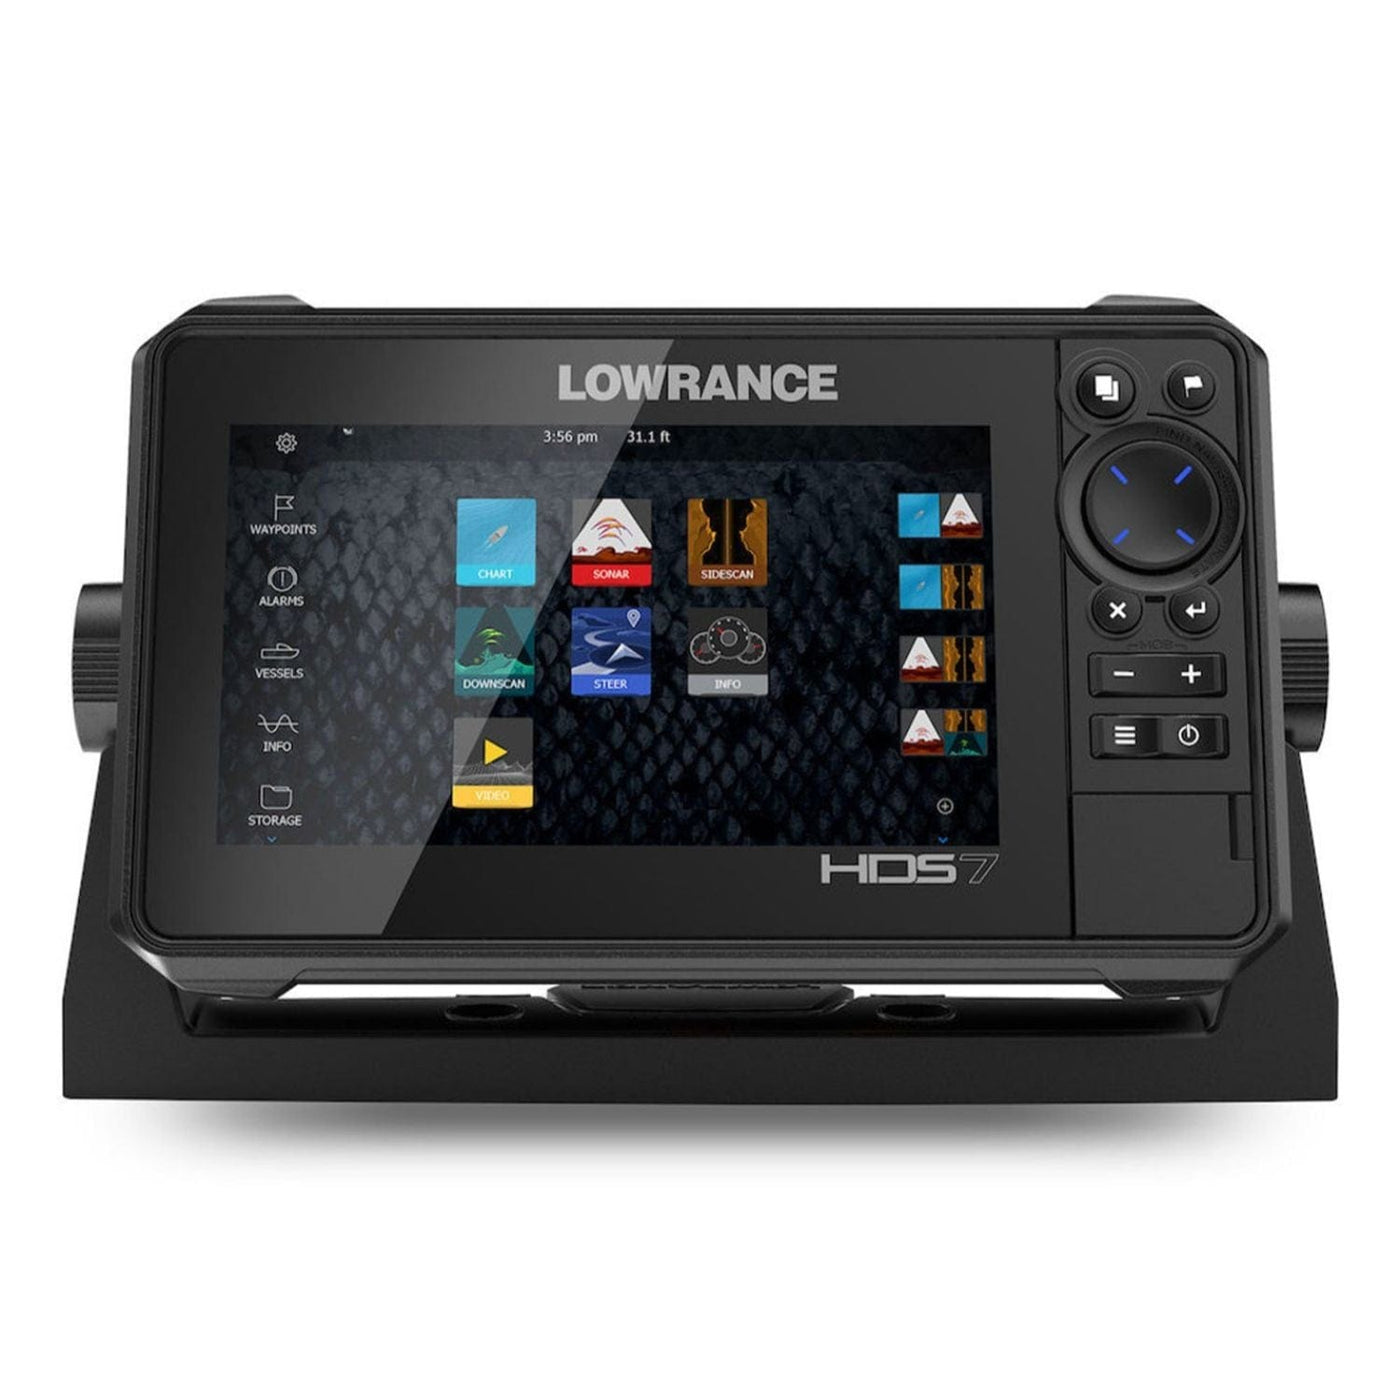 Lowrance Lowrance HDS-7 Live C-MAP Insight without Transducer Marine And Water Sports